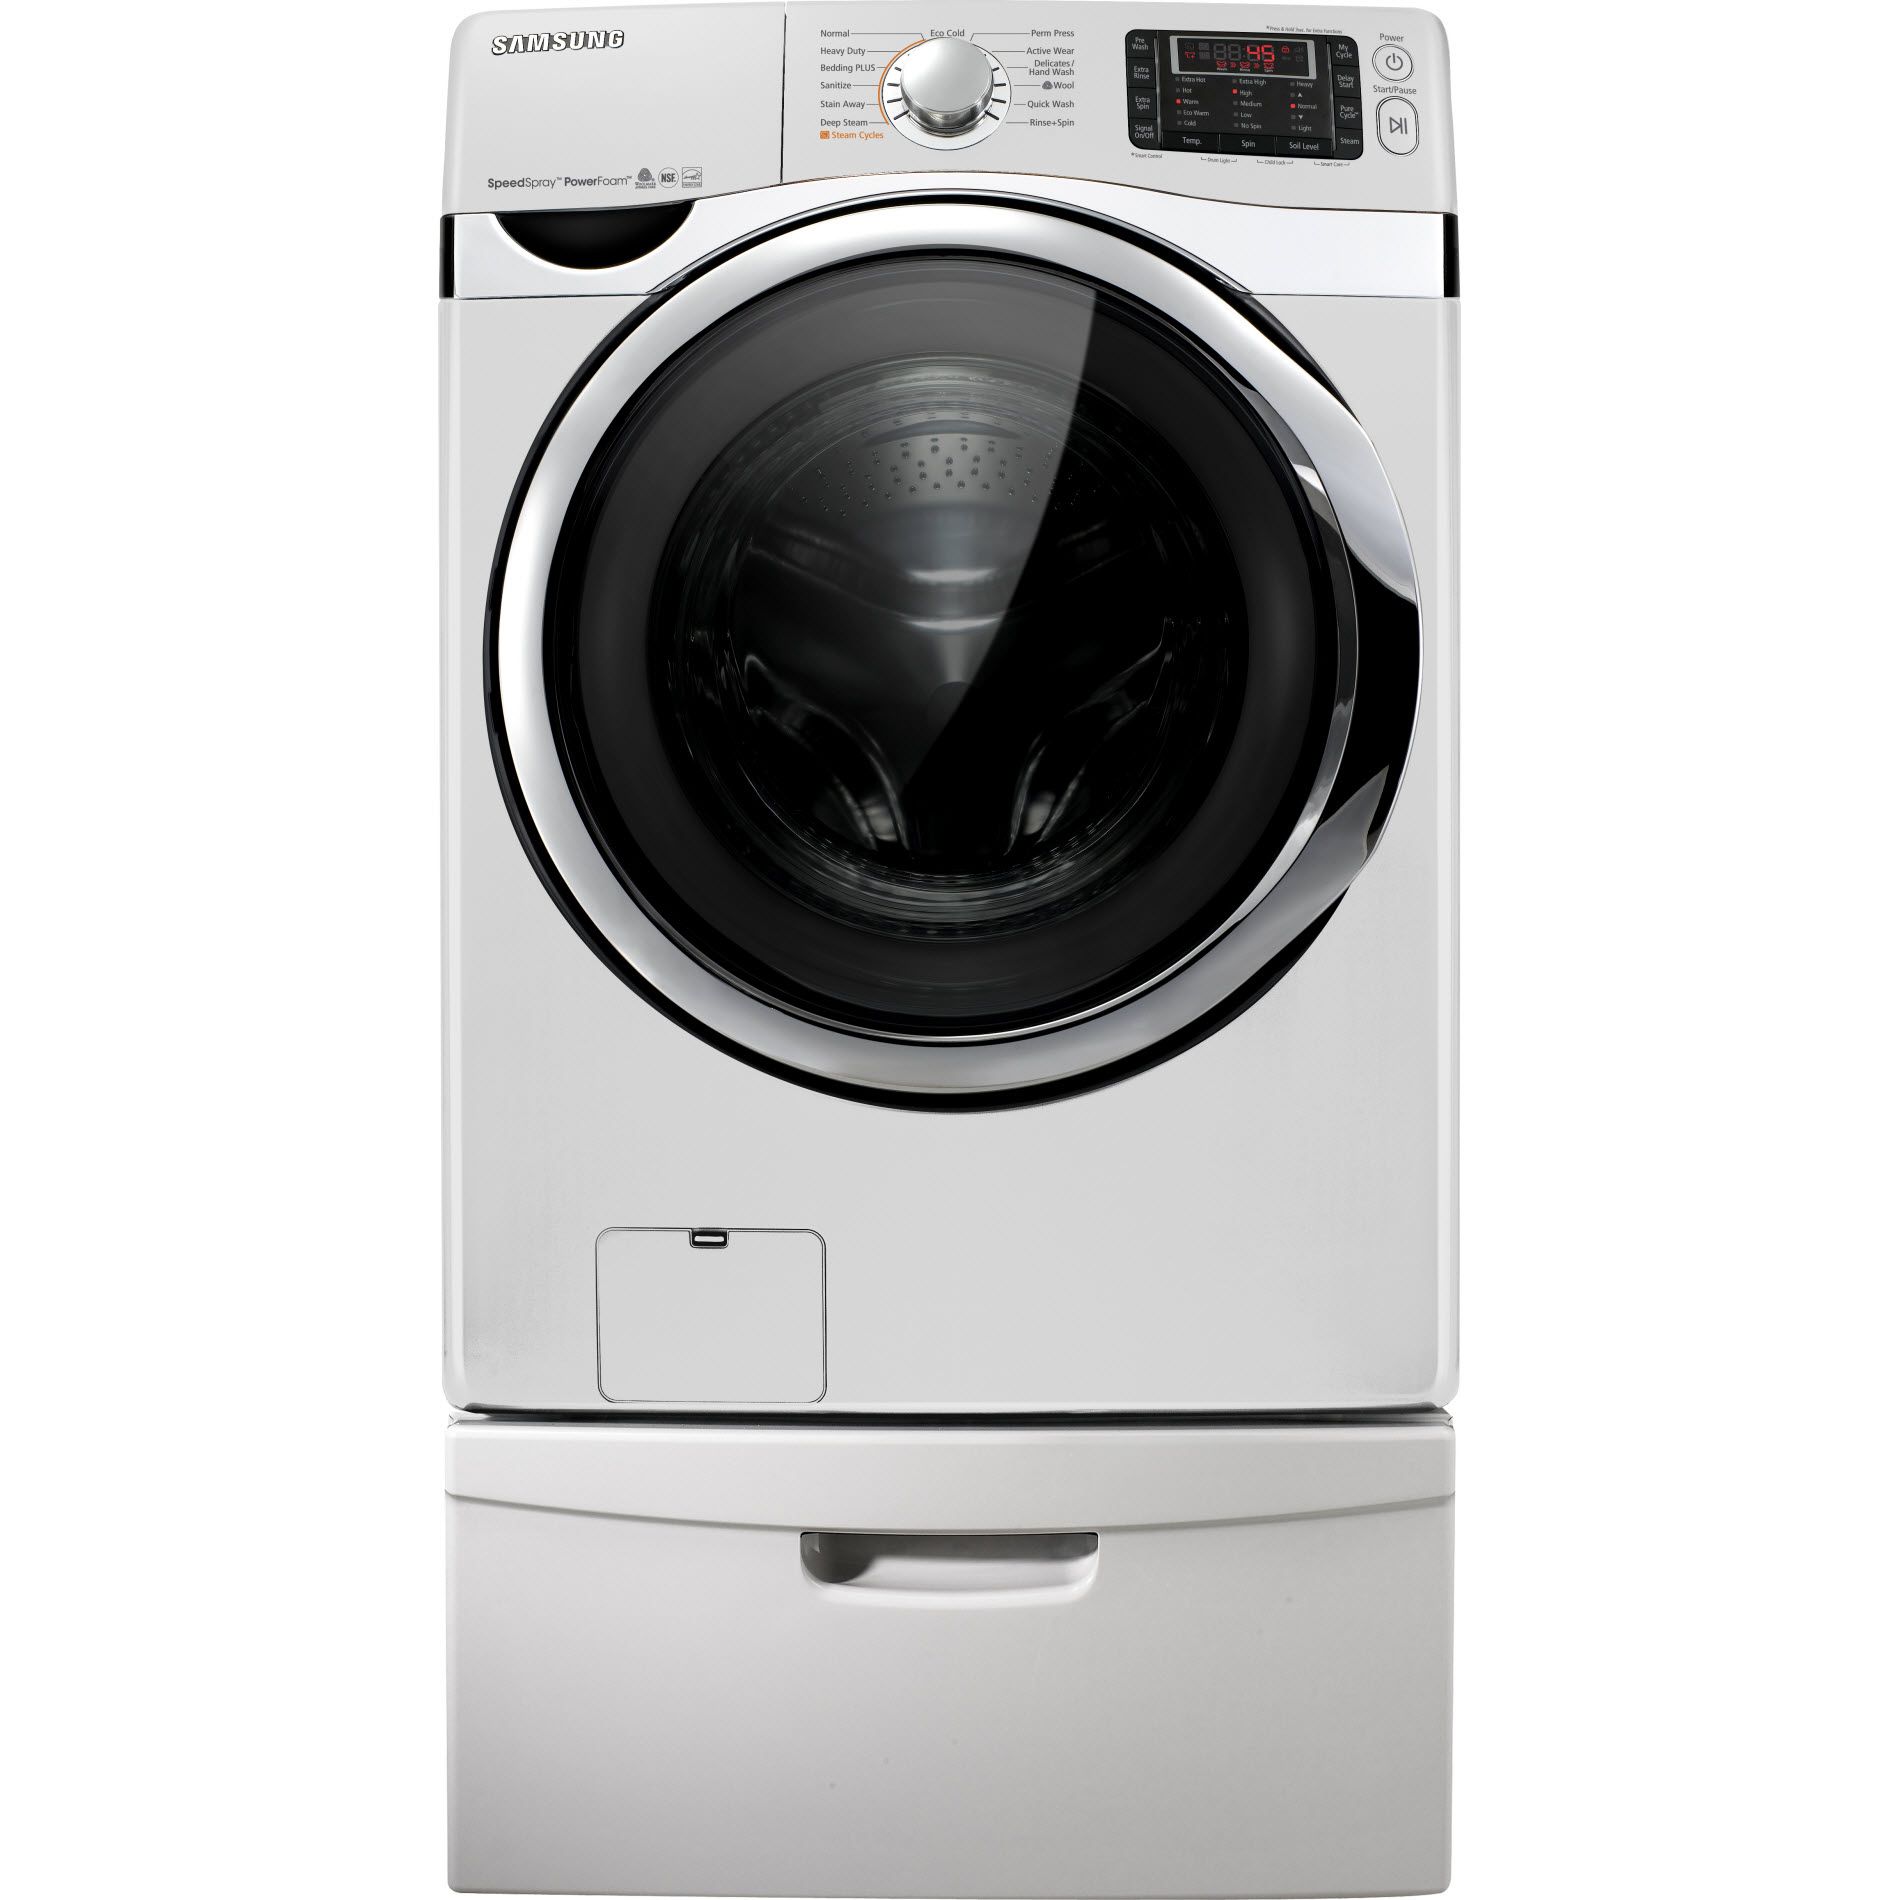 samsung-4-5-cu-ft-front-load-washer-w-vrt-plus-white-stackable